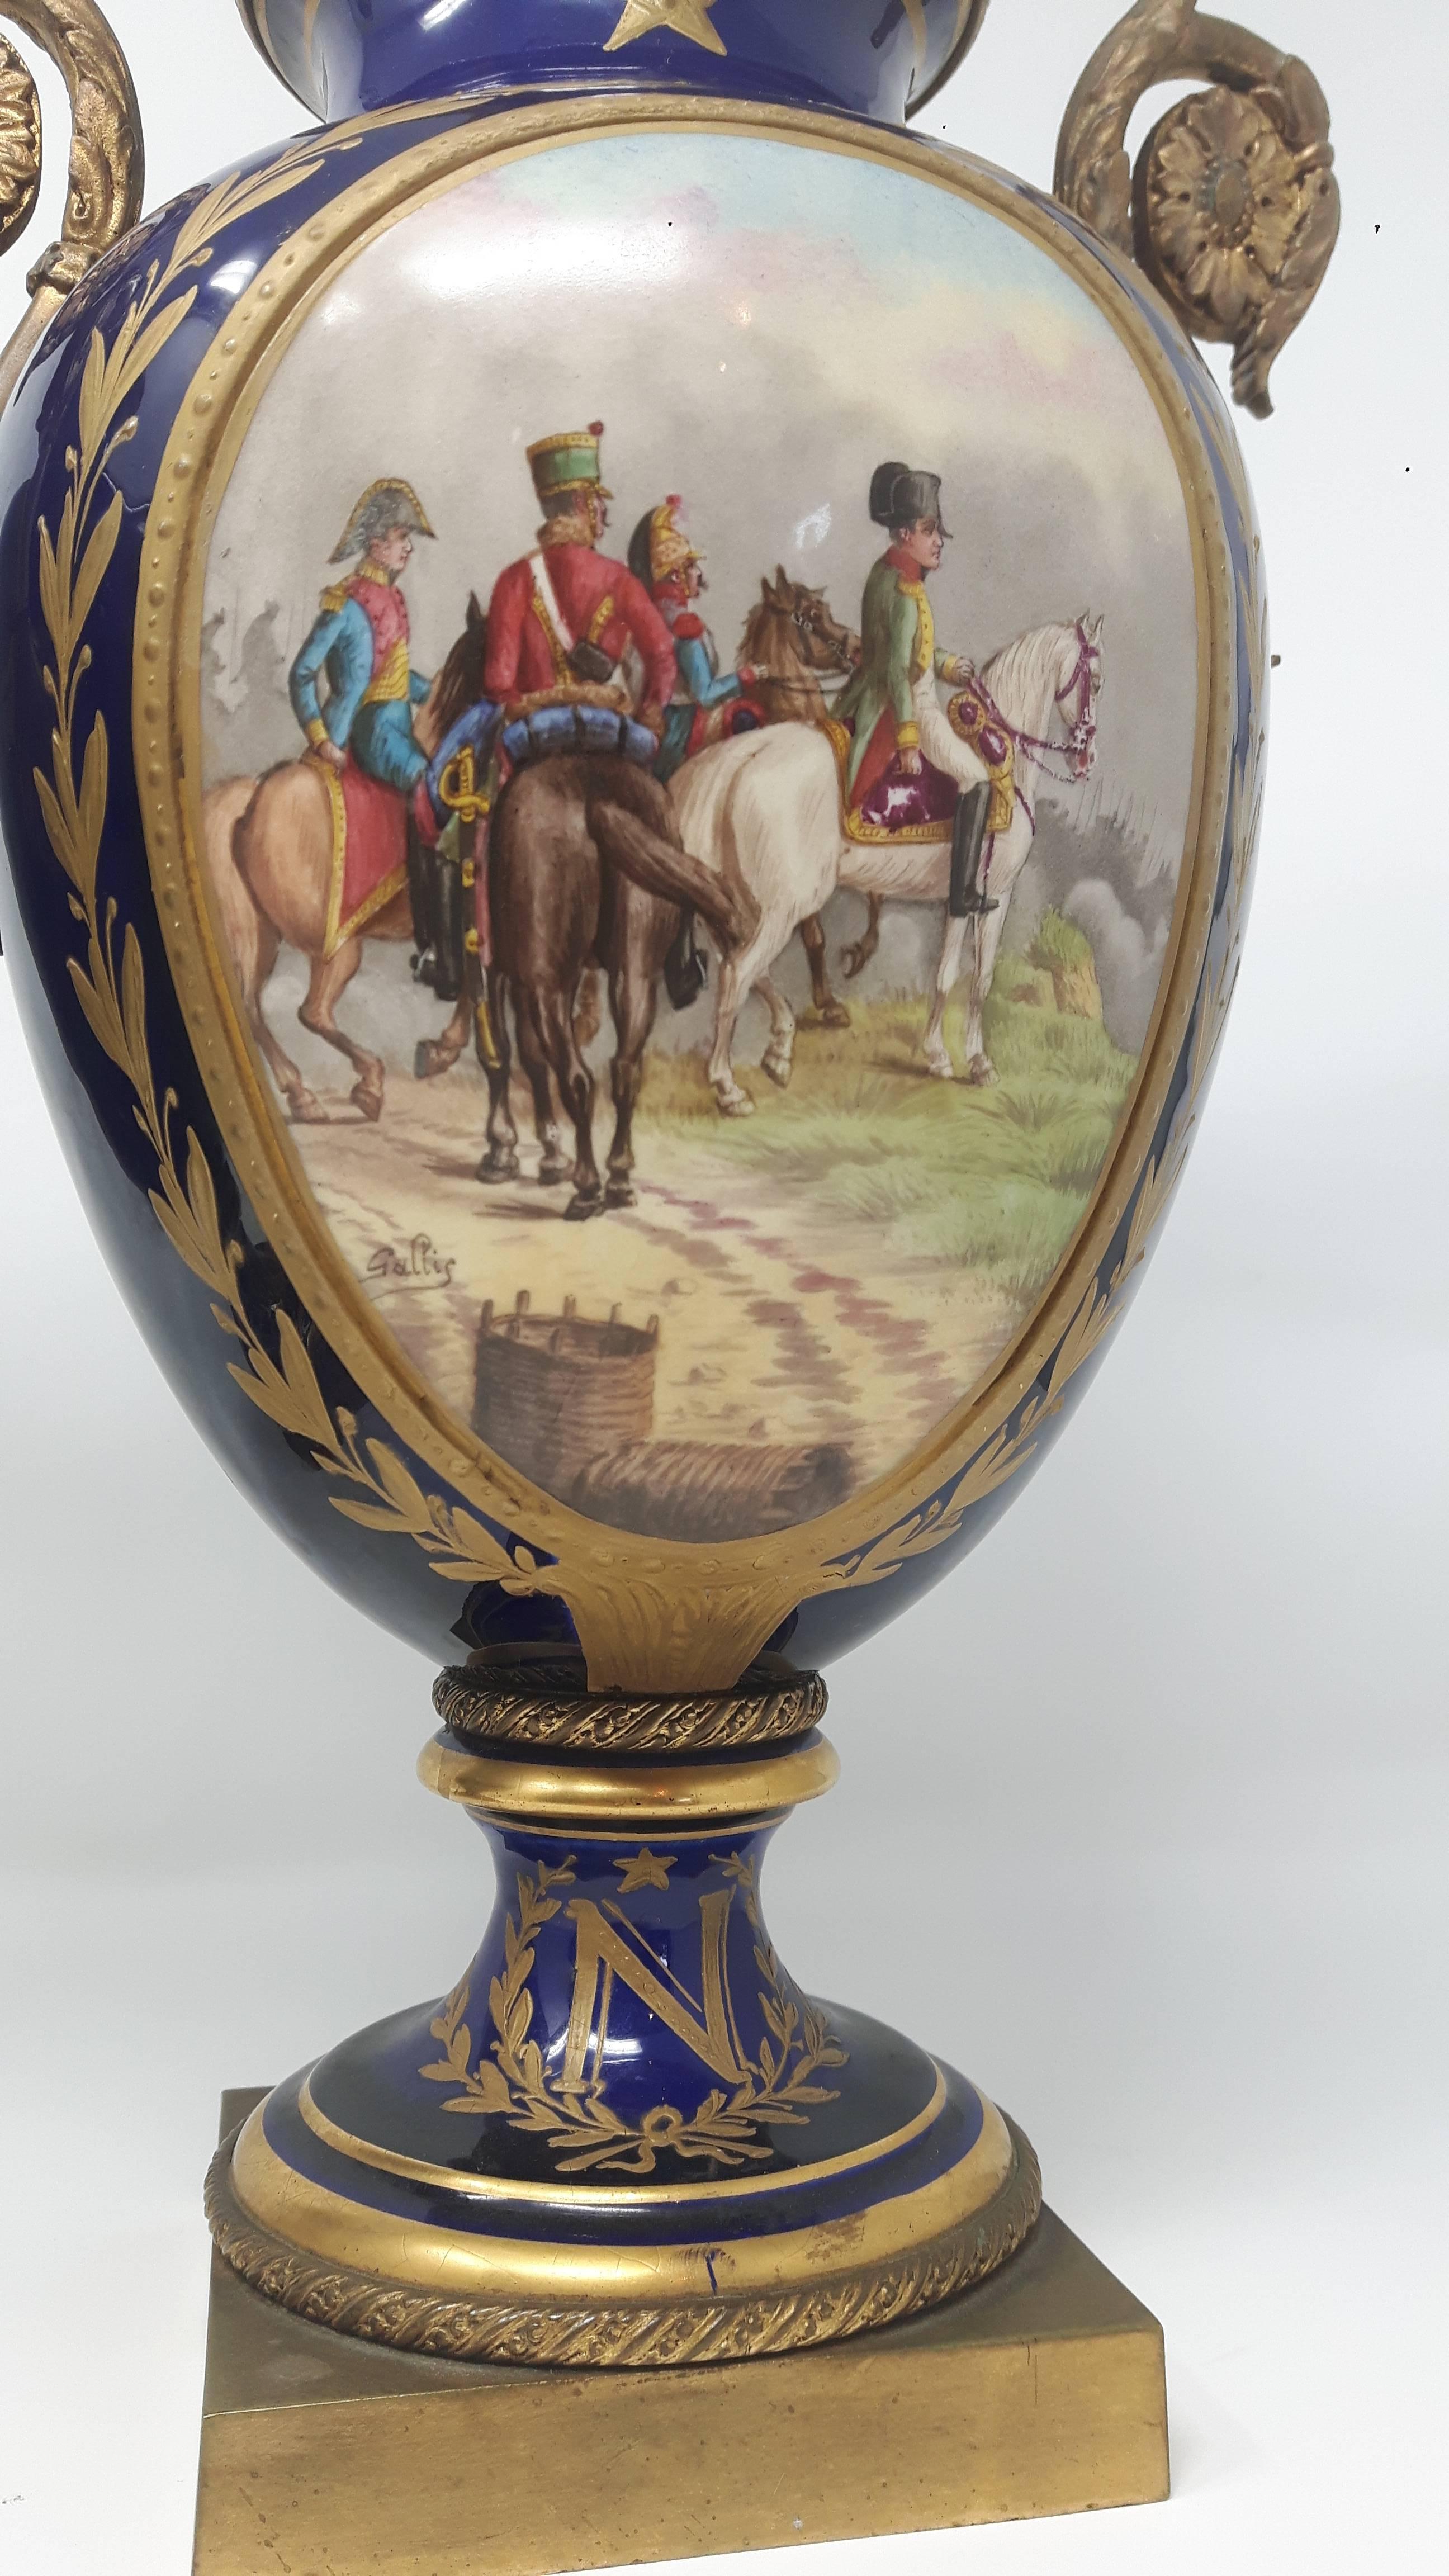 A pair of fine quality ormolu-mounted serves vases, delicately painted with scenes of Napoleon and his soldiers on horseback on one panel and scenery on the back panel.
 